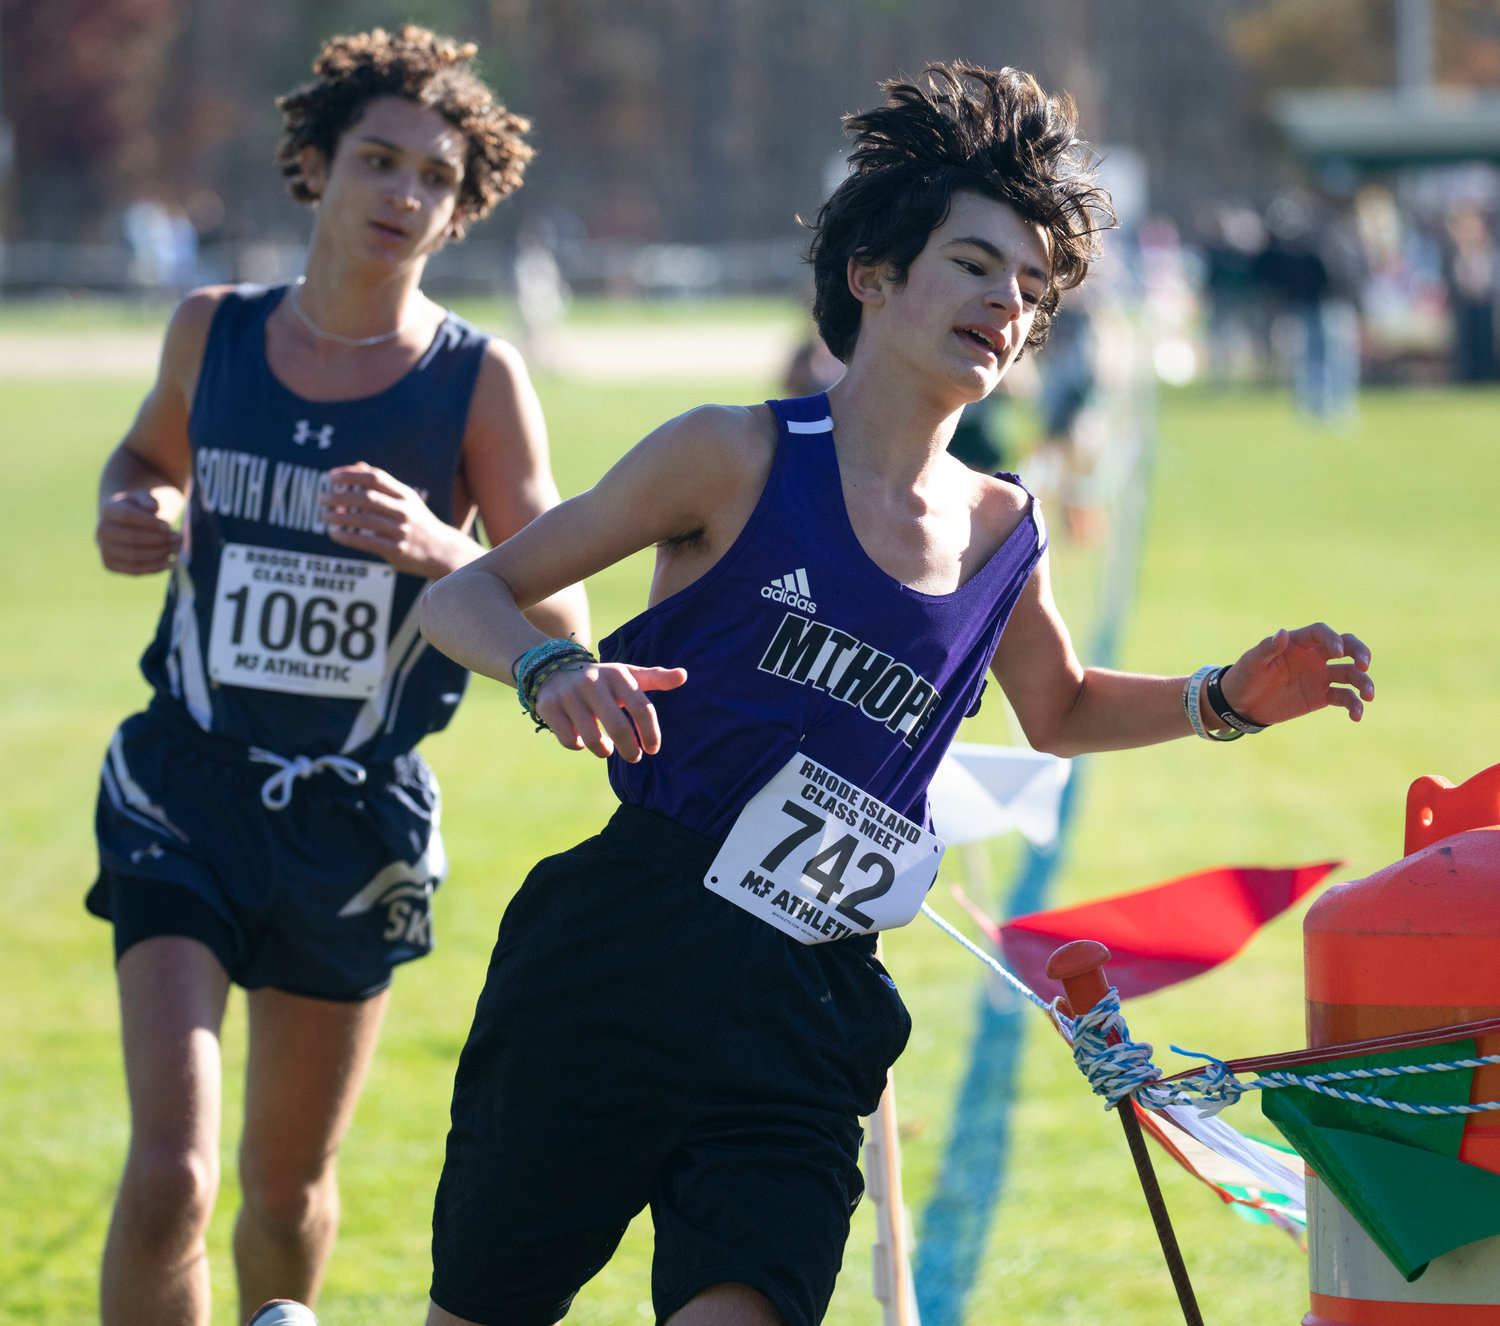 Jacob Betres runs in in the boys class B championship. He placed 36th with a time of 19:06.3 on Saturday at Ponaganset High School.